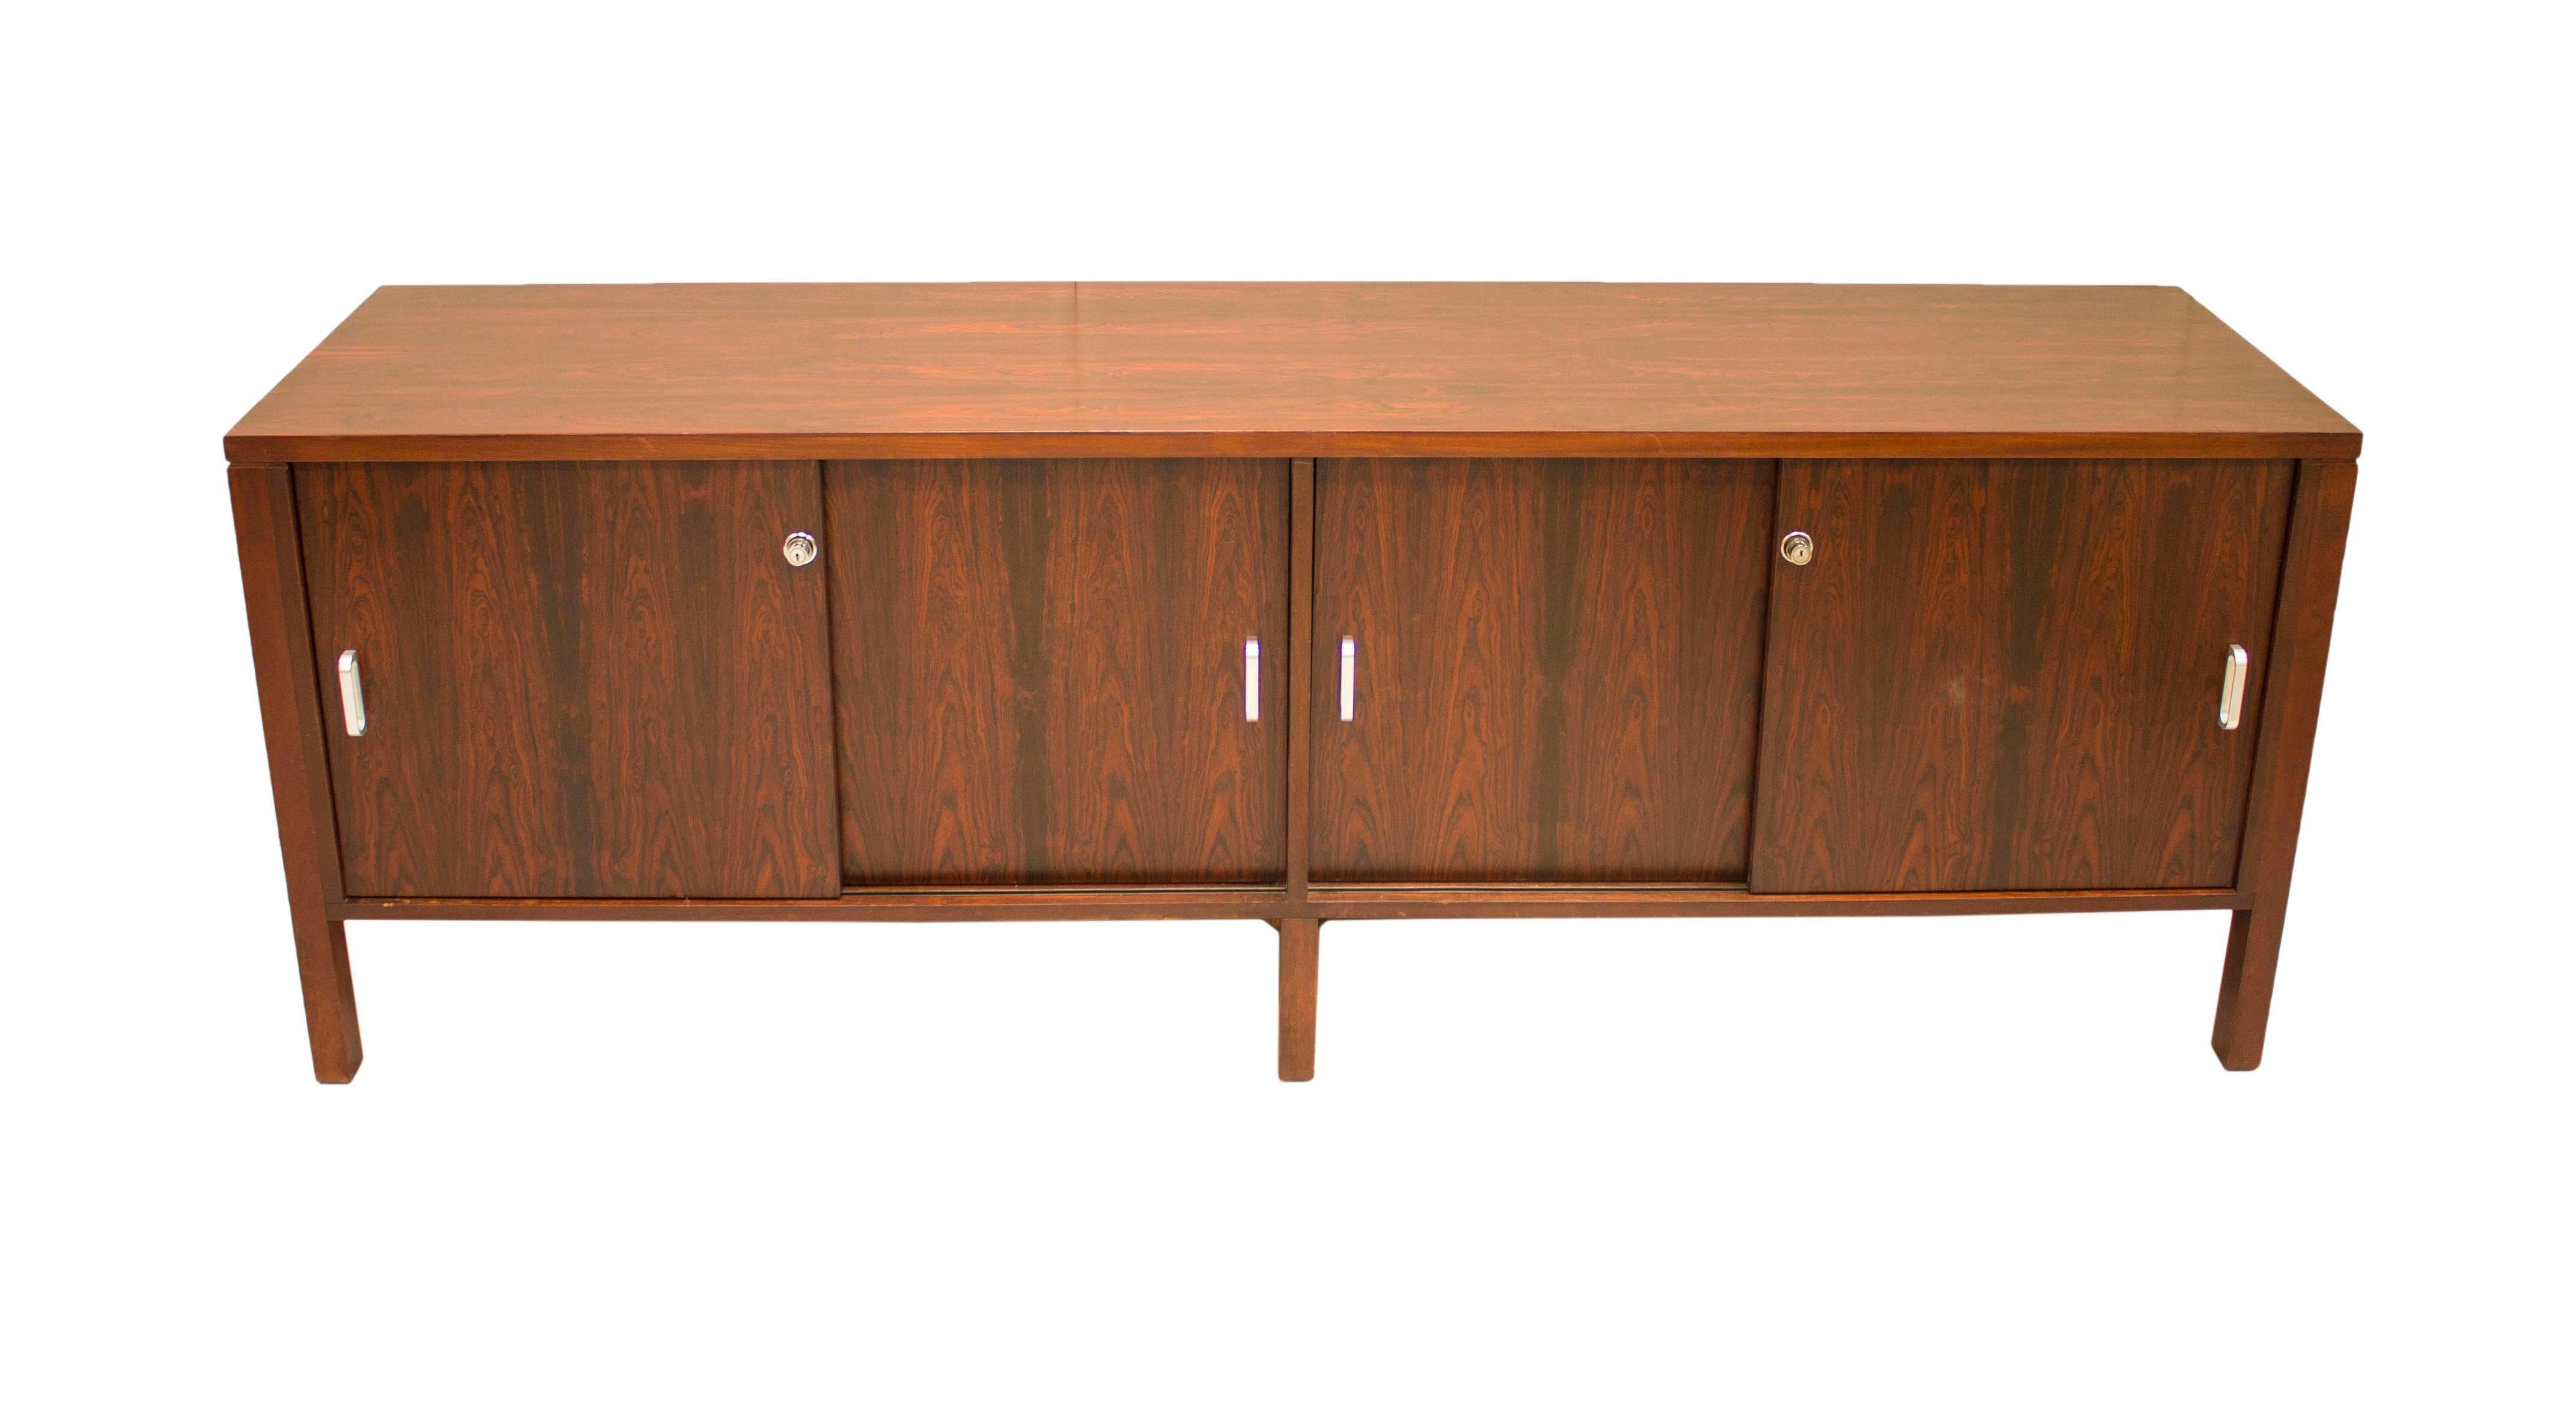 The Danish designers of the Mid-Century movement brought clean, simple lines to the masses and introduced the world to the wonders of Mahogany in its many guises, stunning grain and rich colors.

This stunning unit with its two large storage areas